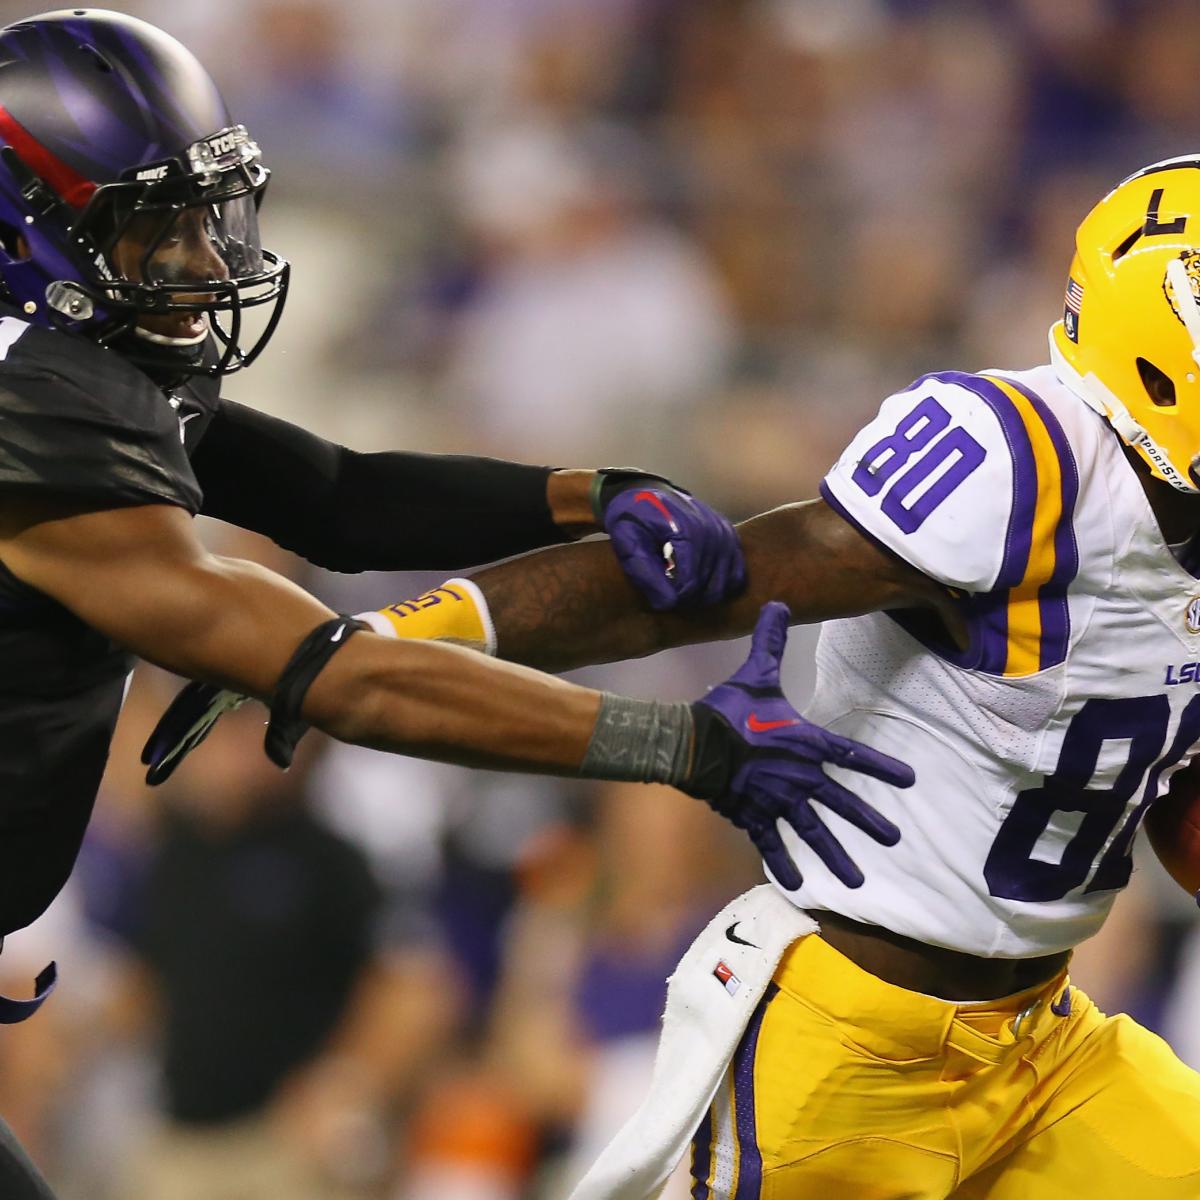 UAB vs. LSU: Live Score and Highlights | Bleacher Report | Latest News, Videos and ...